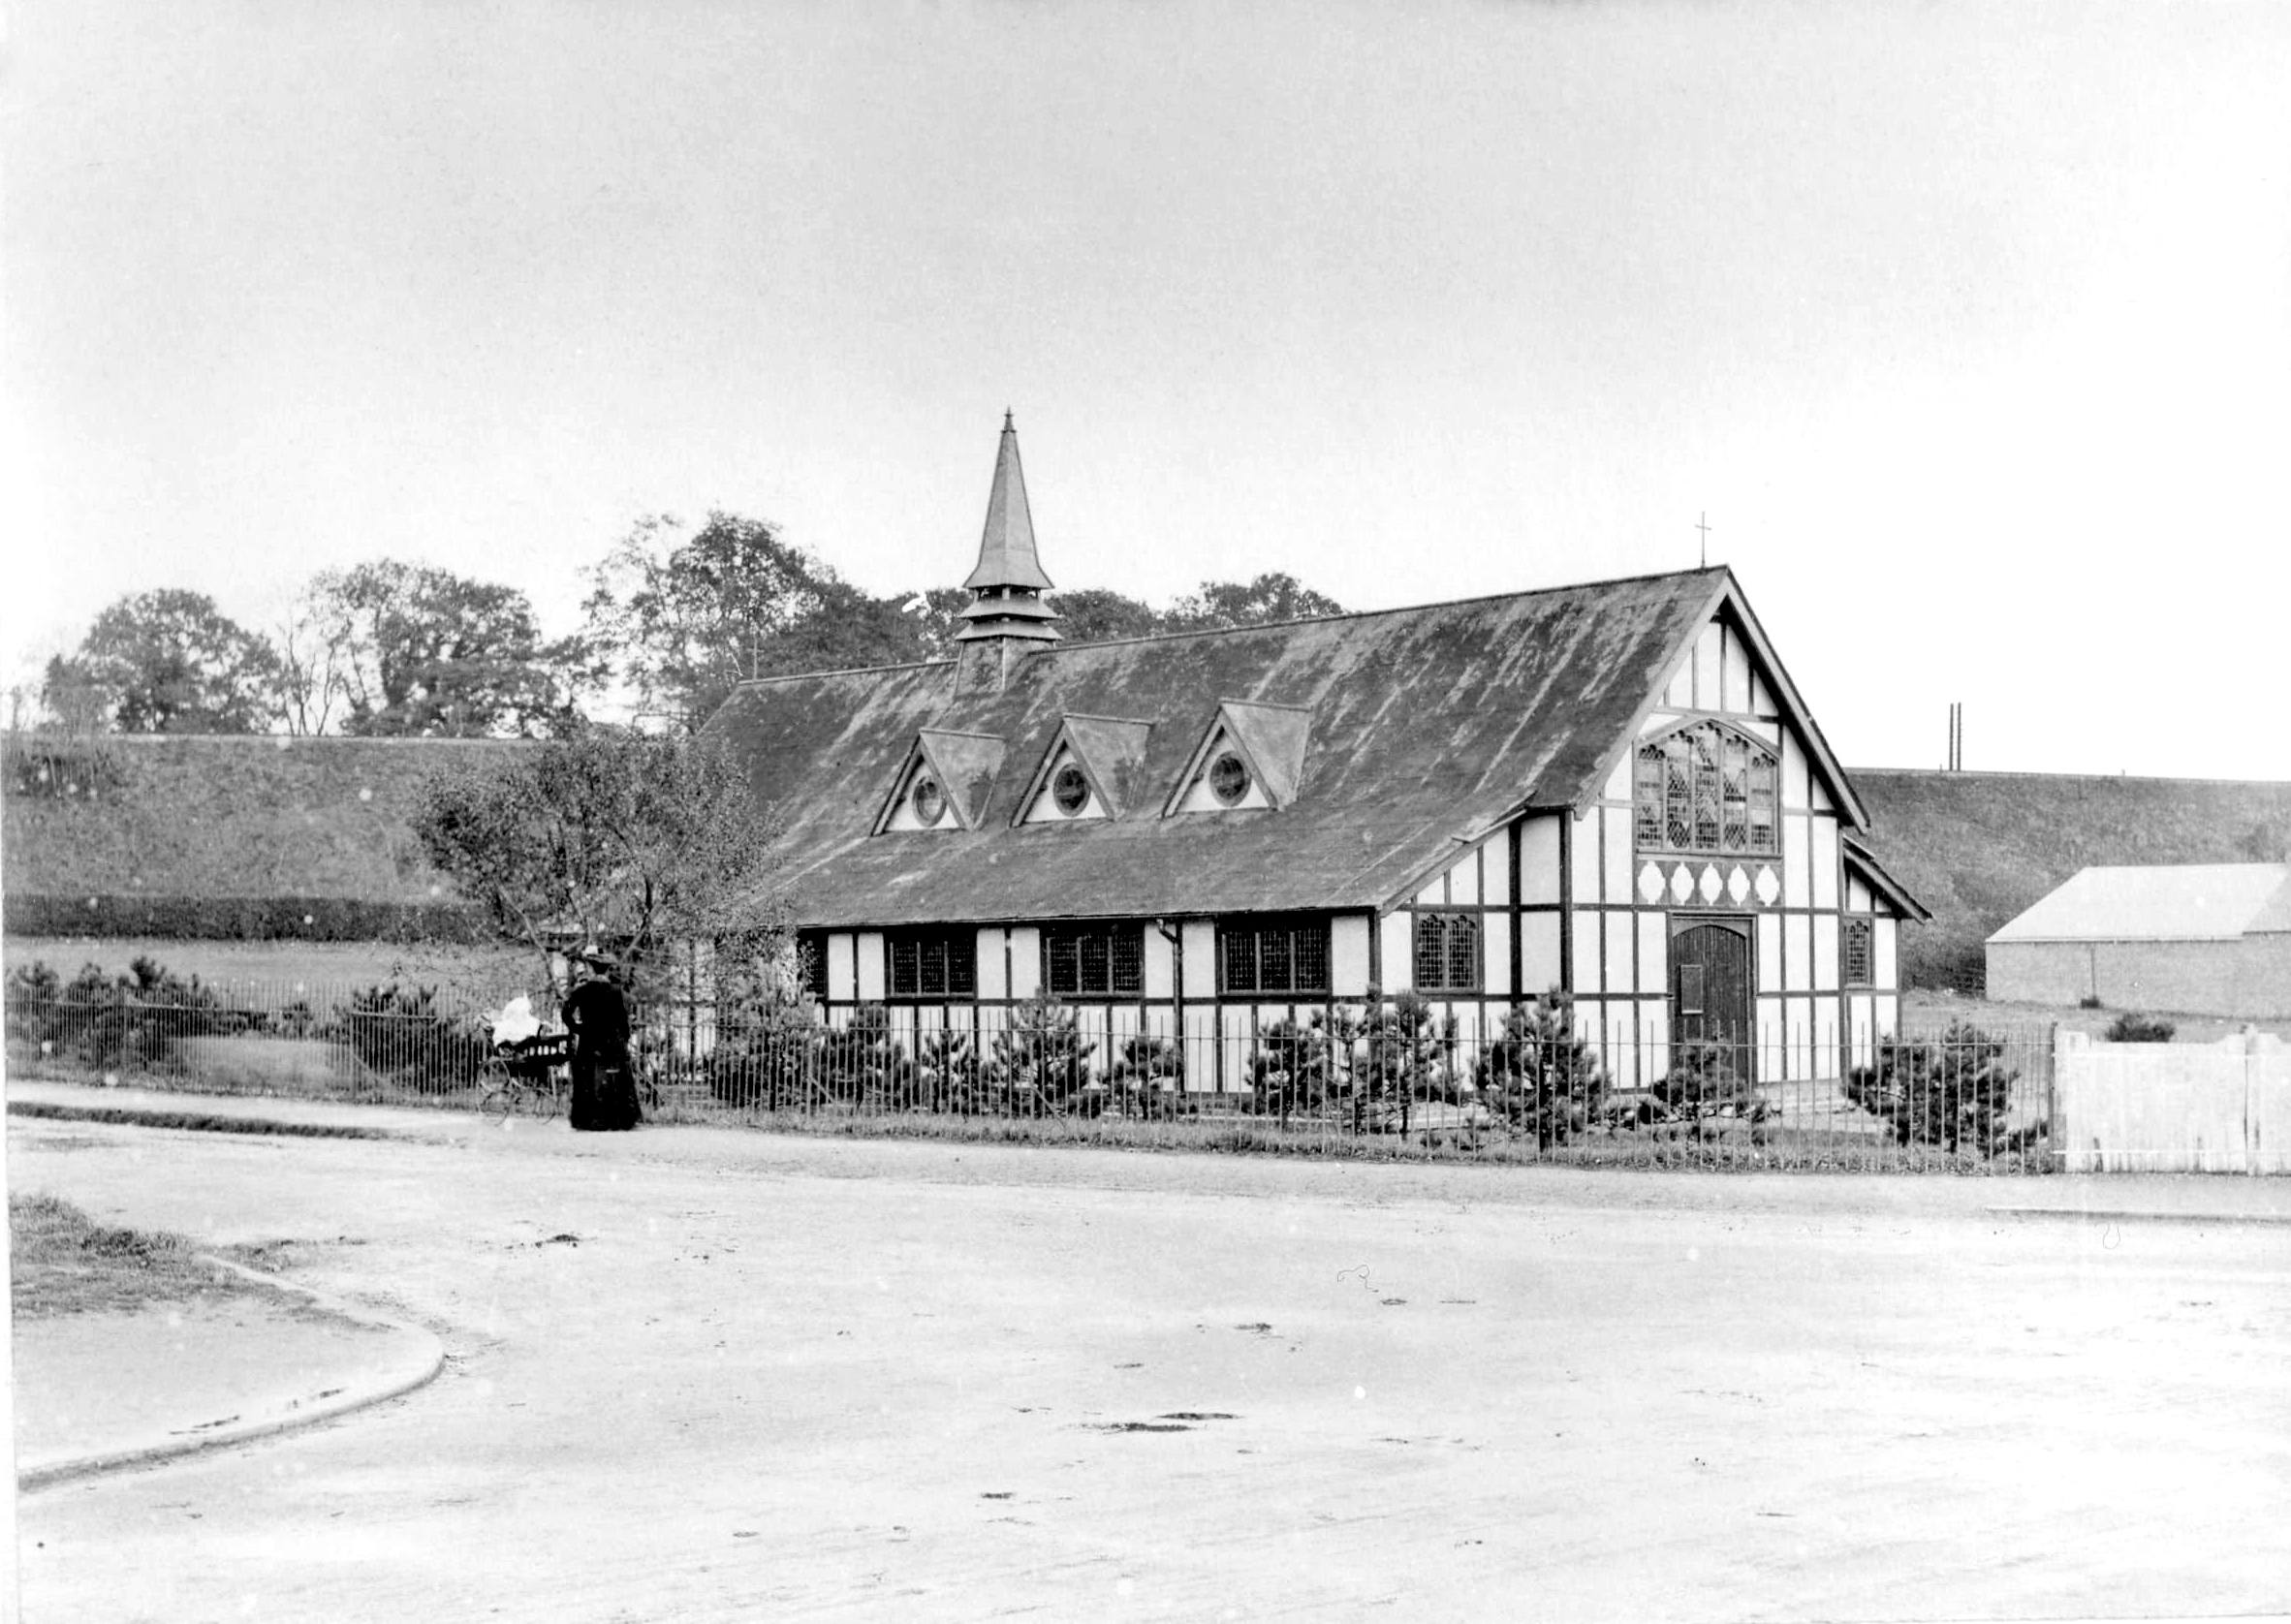 History of HARPENDEN TOWN